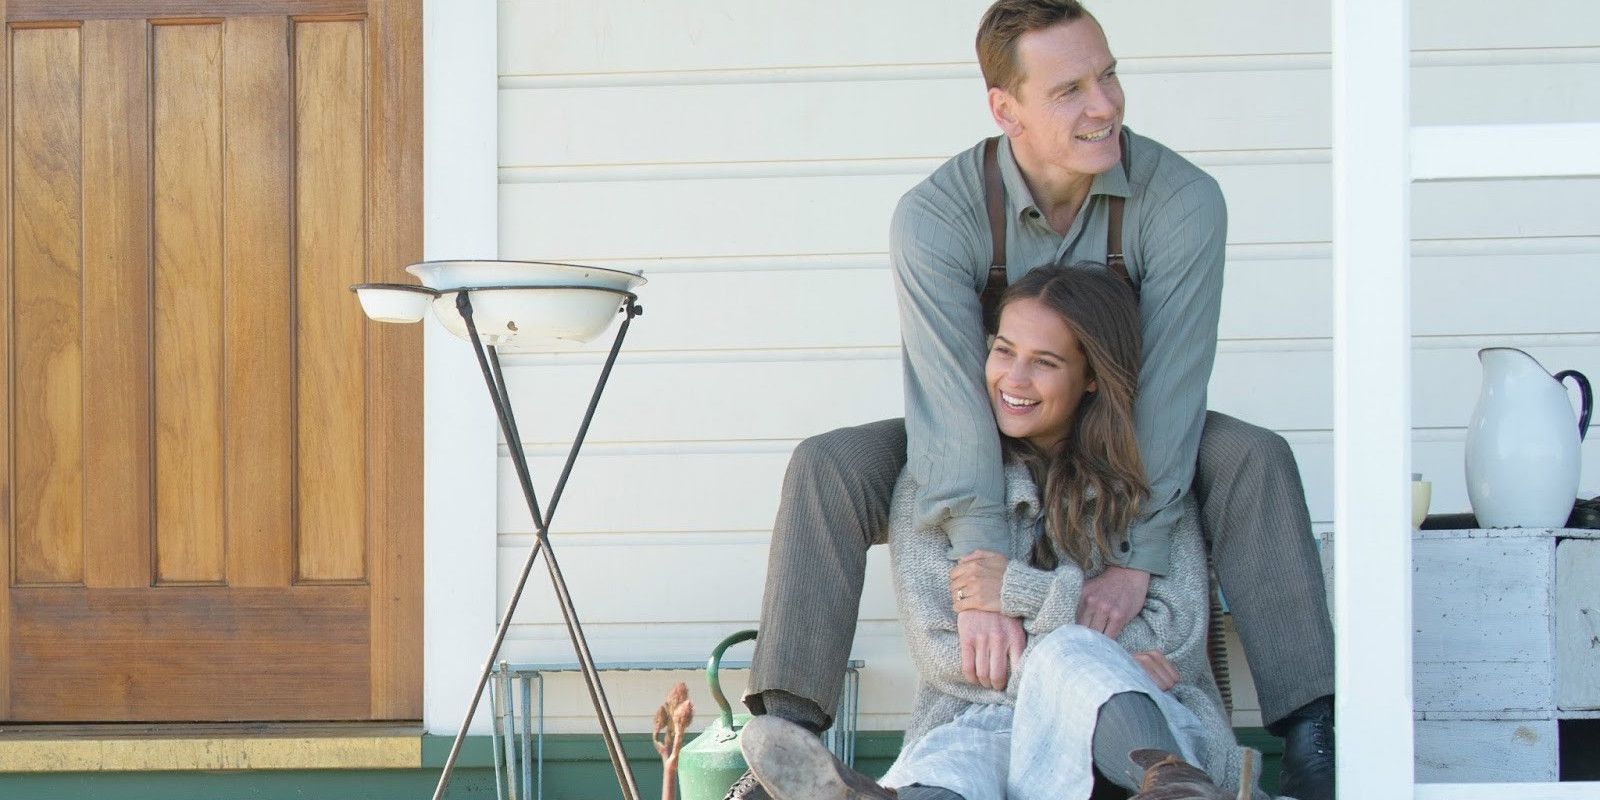 The Light Between Oceans - Michael Fassbender and Alicia Vikander